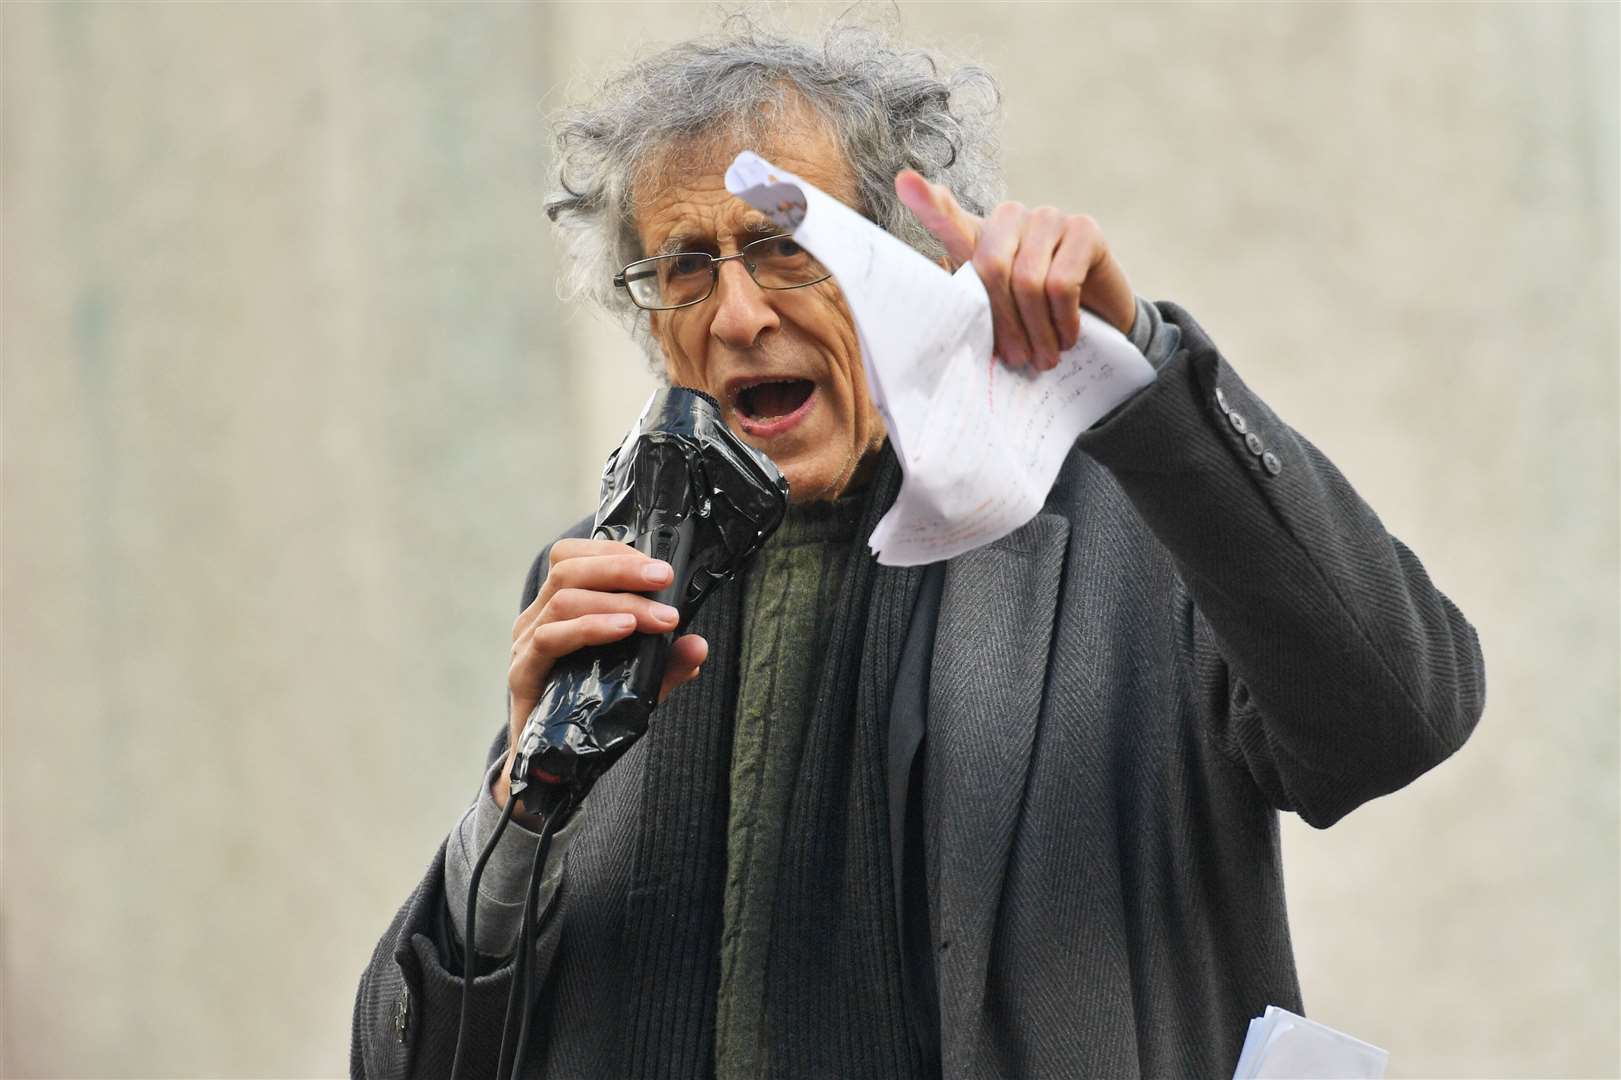 Piers Corbyn is one of the witnesses due to give evidence to the Undercover Policing Inquiry in the coming weeks (Jacob King/PA)